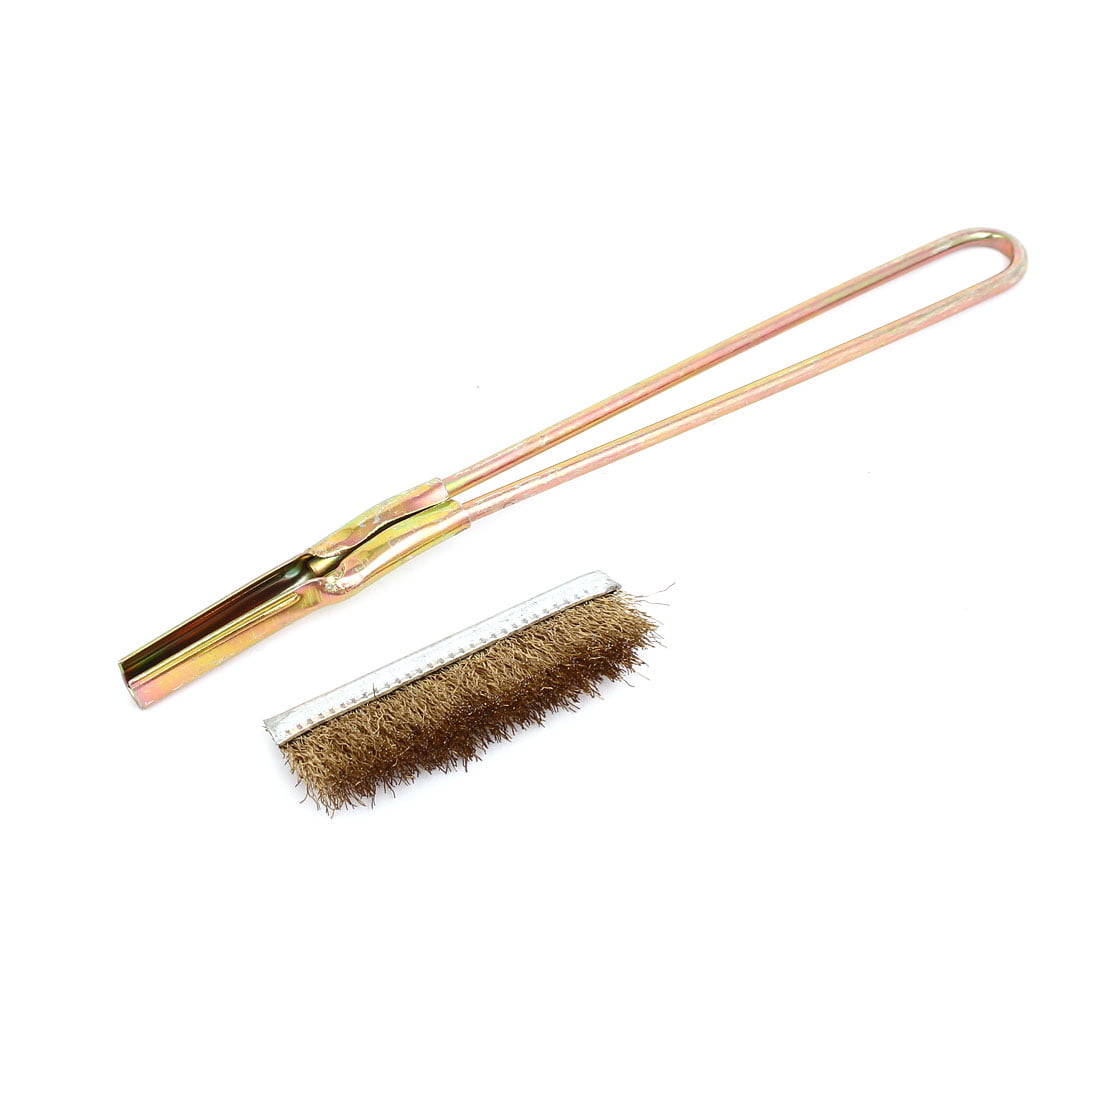 21cm Length Handy Tool Metal Handle Brass Wire Cleaning Brush